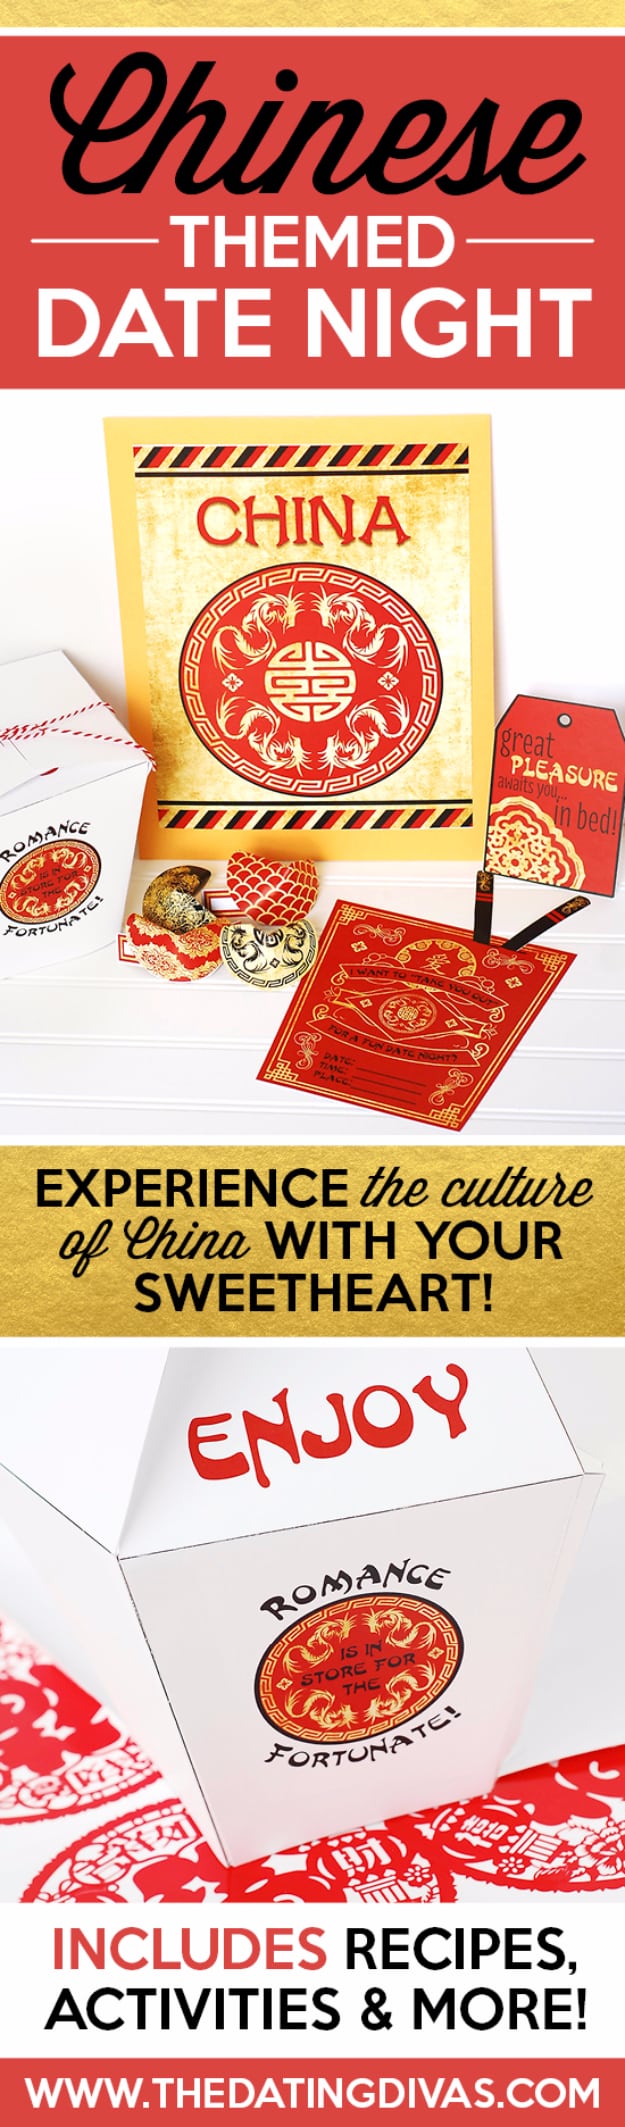 DIY Date Night Ideas - Chinese Themed Date Night - Creative Ways to Go On Inexpensive Dates - Creative Ways for Couples to Spend Time Together creative date nights diy idea